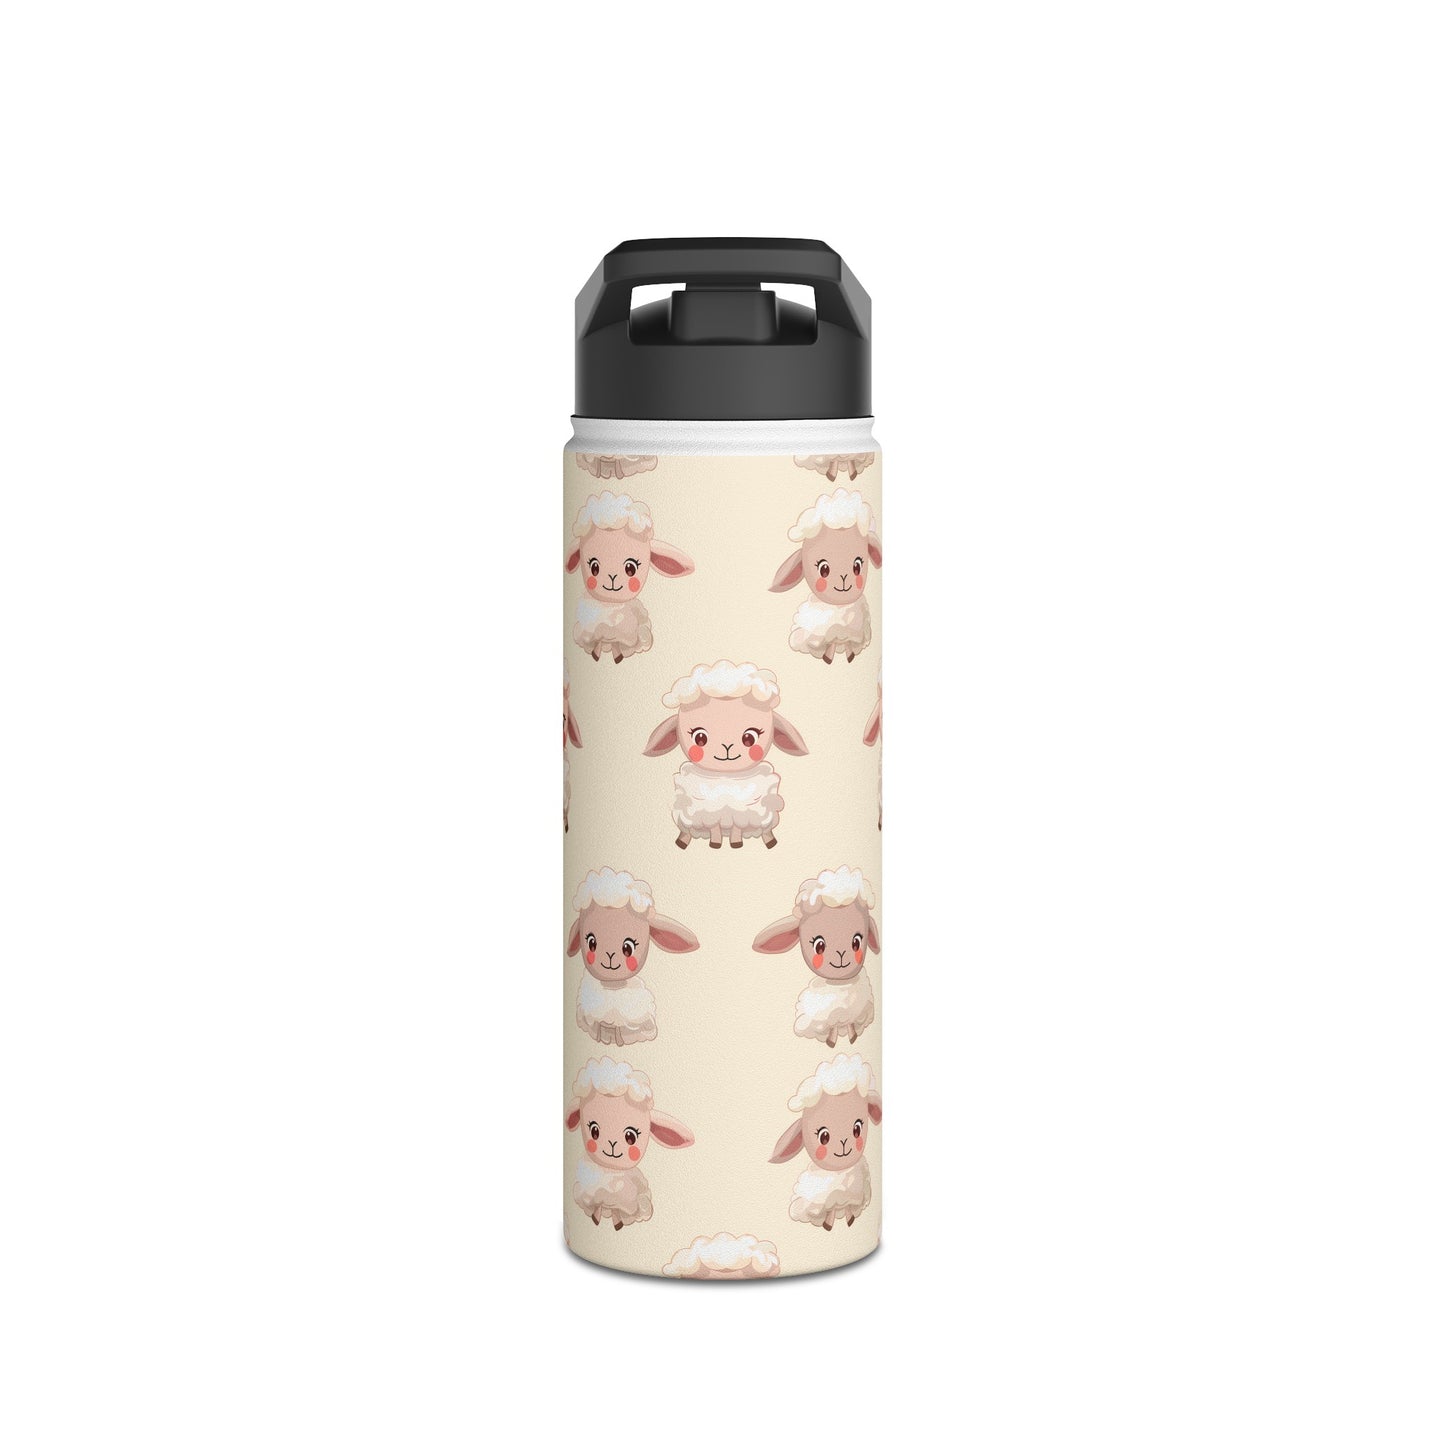 Insulated Water Bottle Thermos, 18oz, Cute Baby Lamb - Double Walled Stainless Steel, Keeps Drinks Hot or Cold